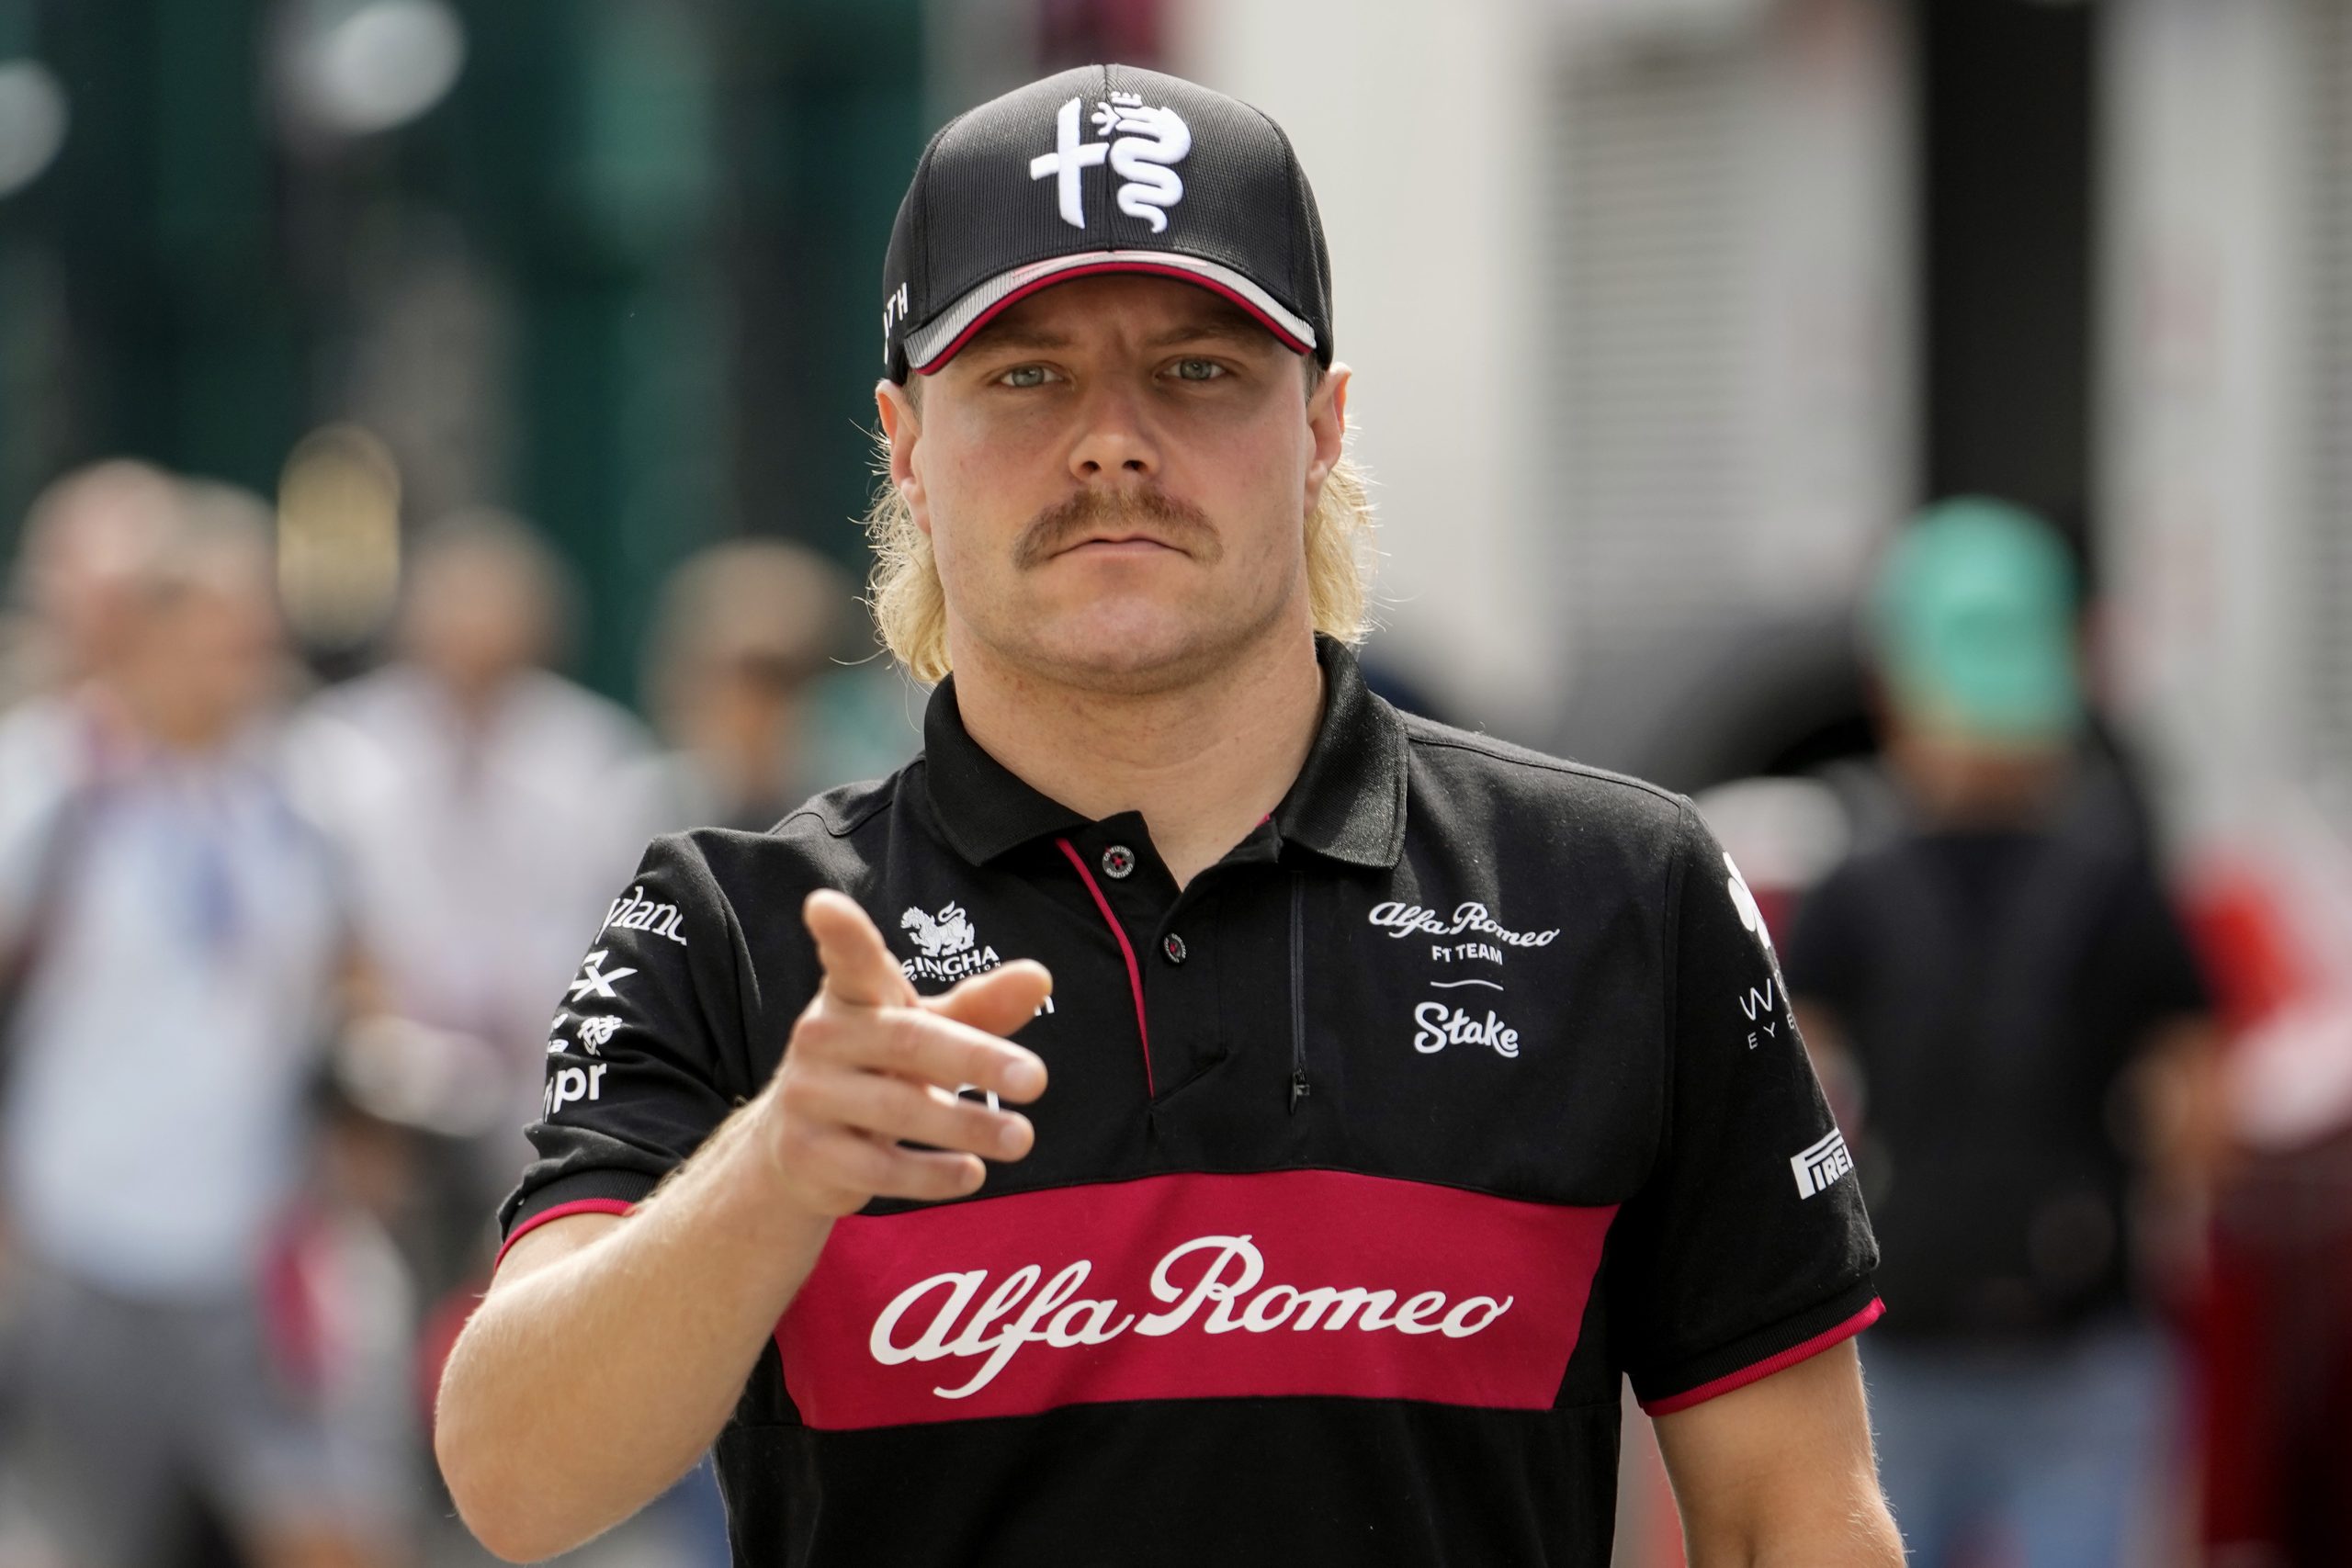 Sauber's Formula 1 Issues Are Manageable, Says Bottas